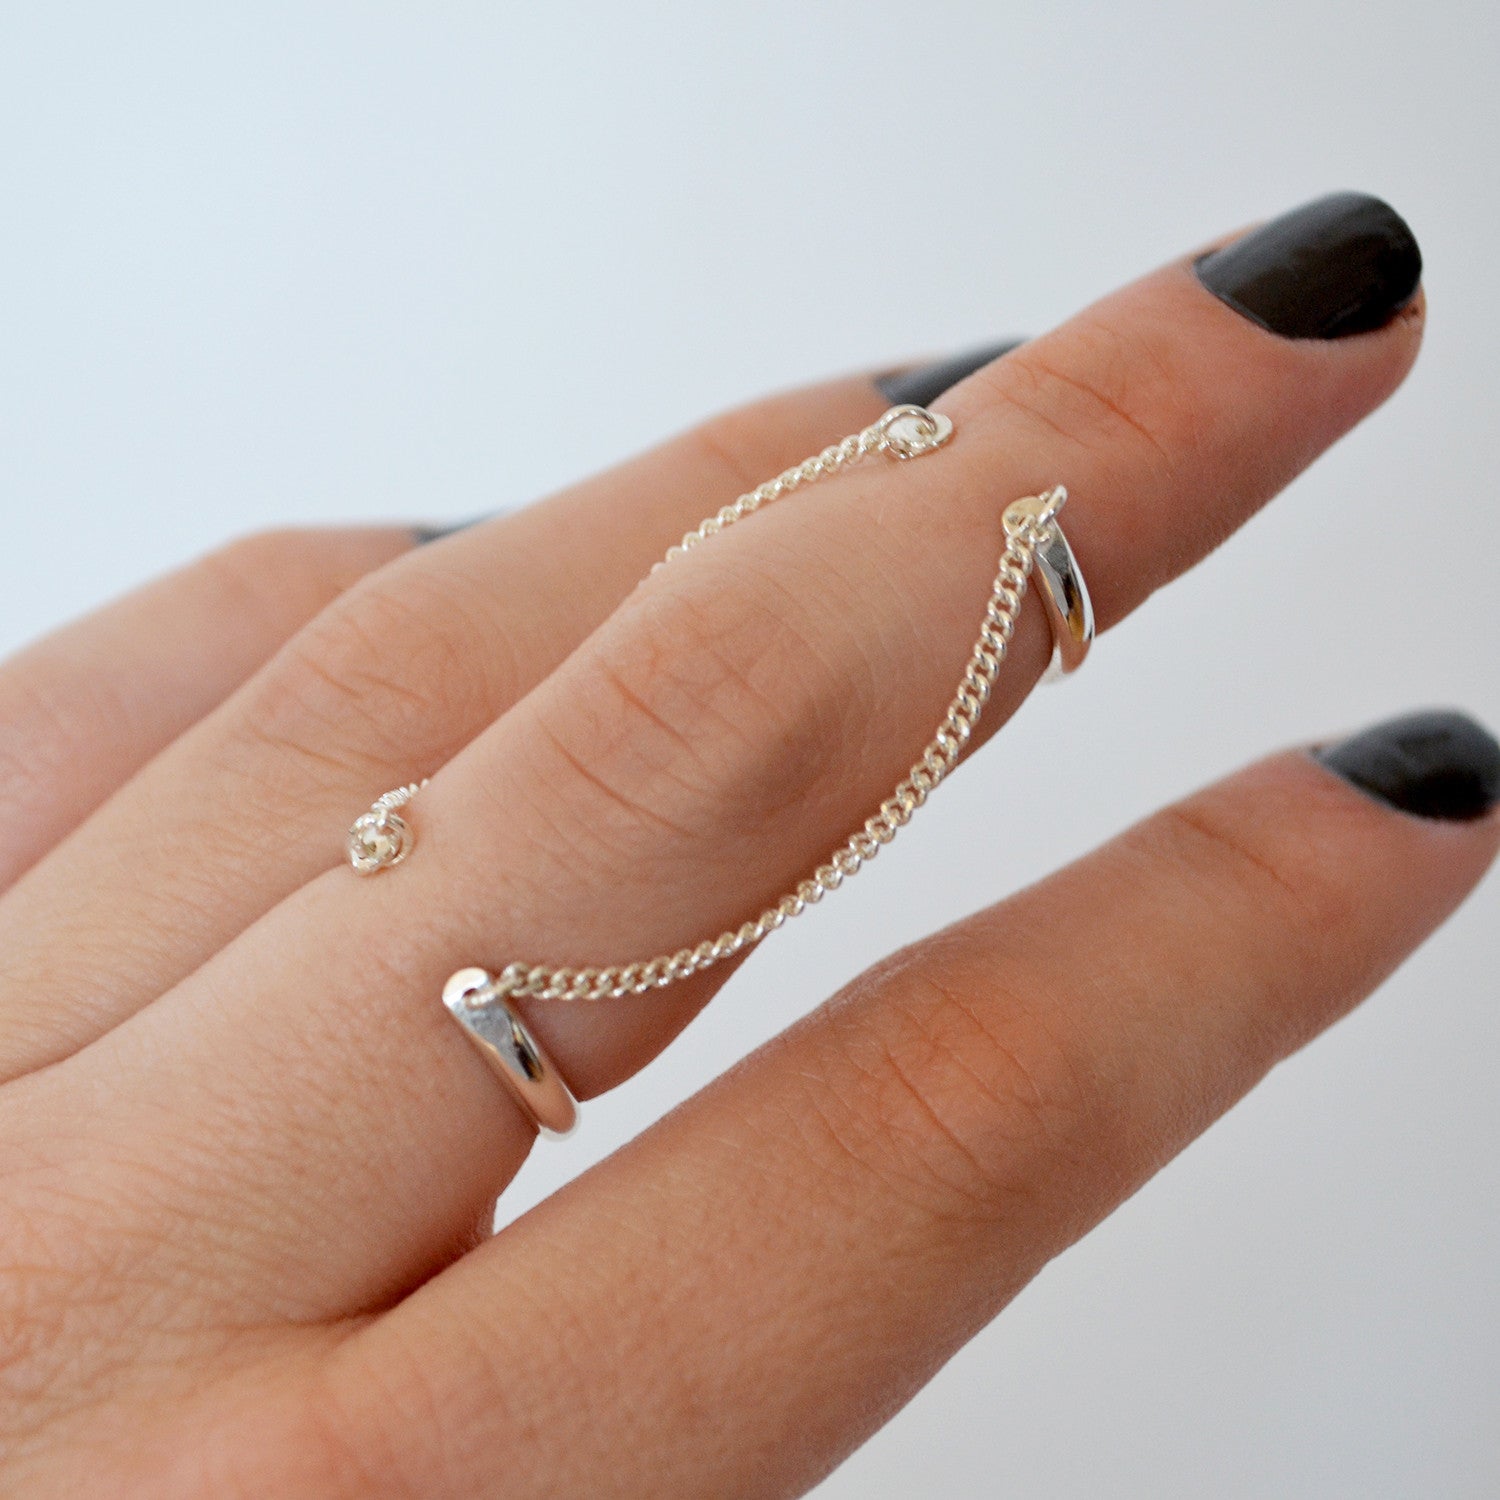 Buy Silver Joined Chain Double Finger Rings, Connected Single Chain Band  Rings Set, Stacking Chain Linked Knuckle Rings, Chain Handcuff Rings Online  in India - Etsy